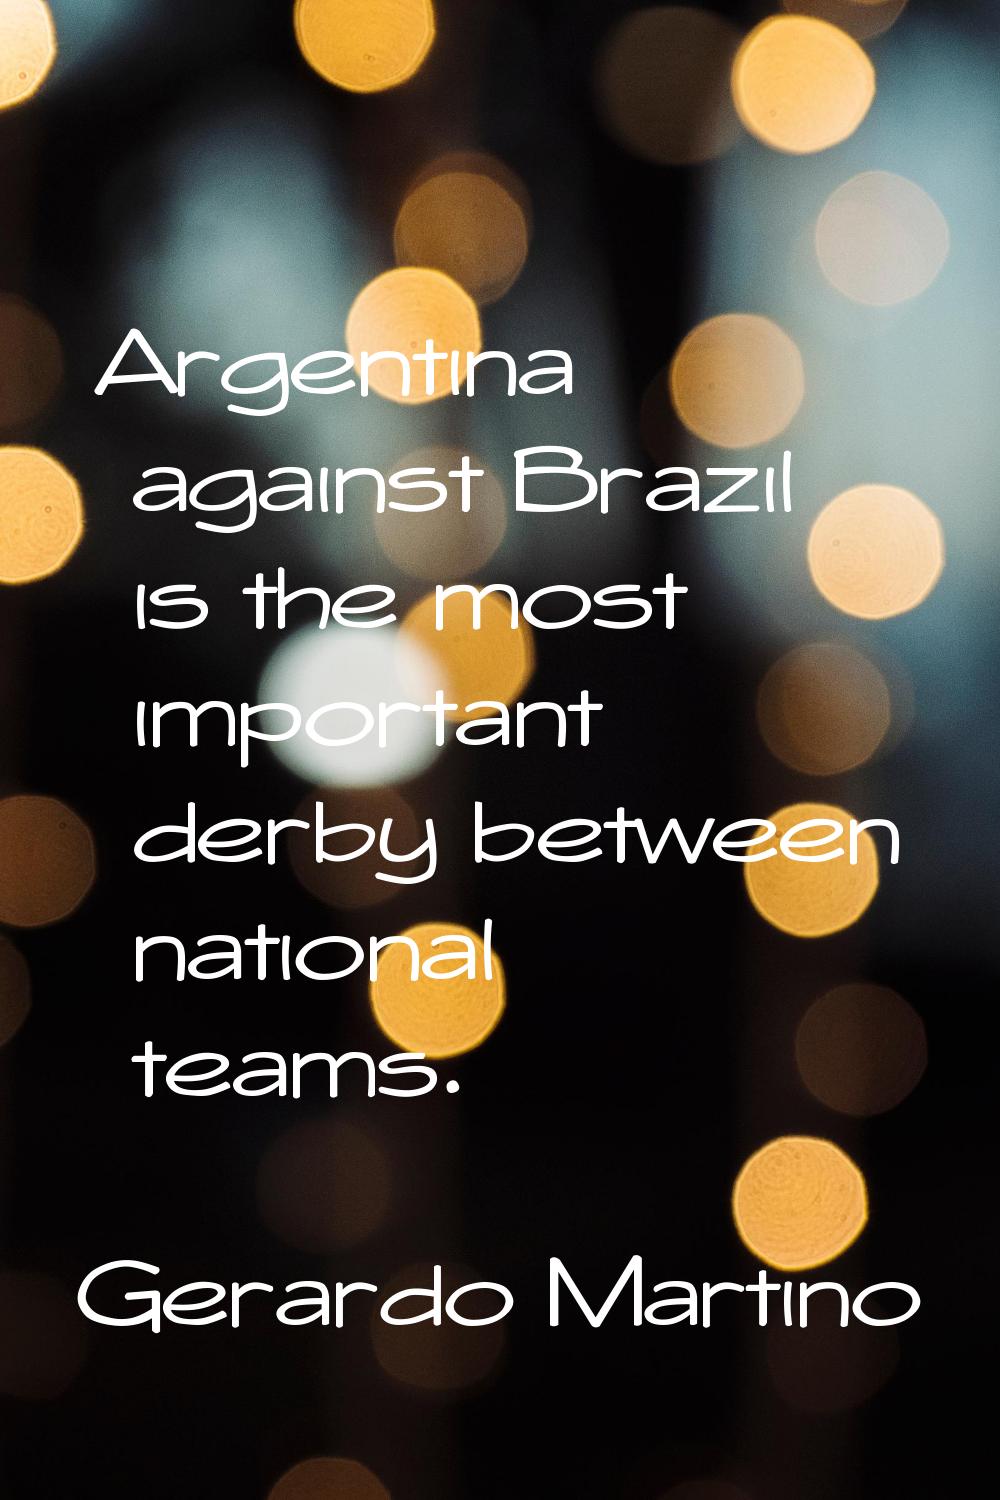 Argentina against Brazil is the most important derby between national teams.